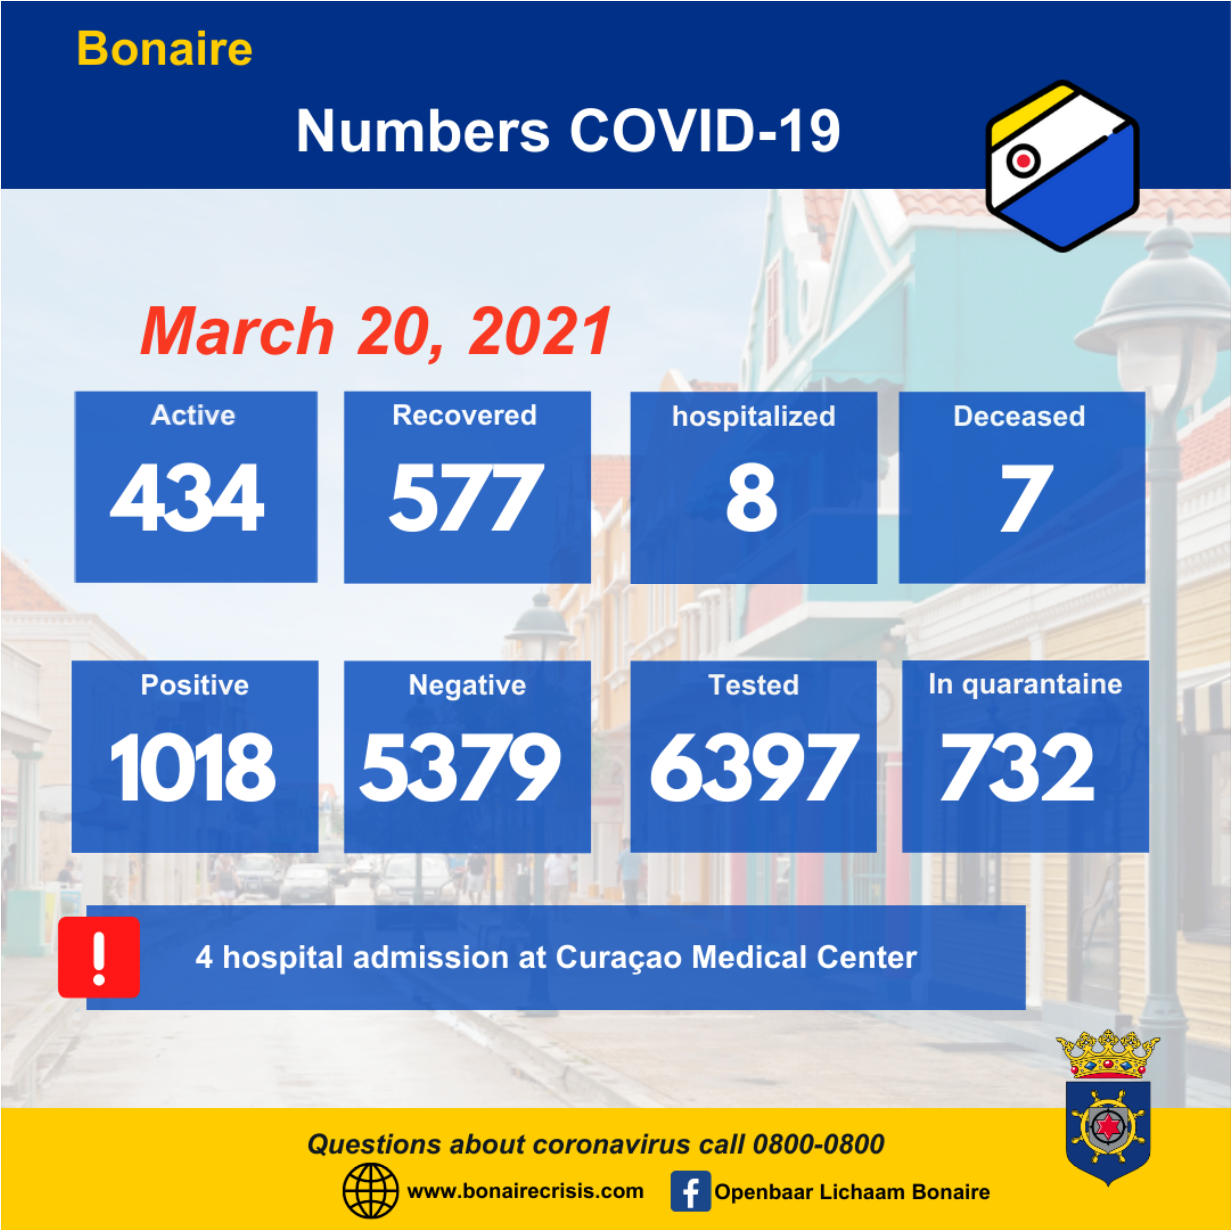 57 New Covid Infections on Bonaire